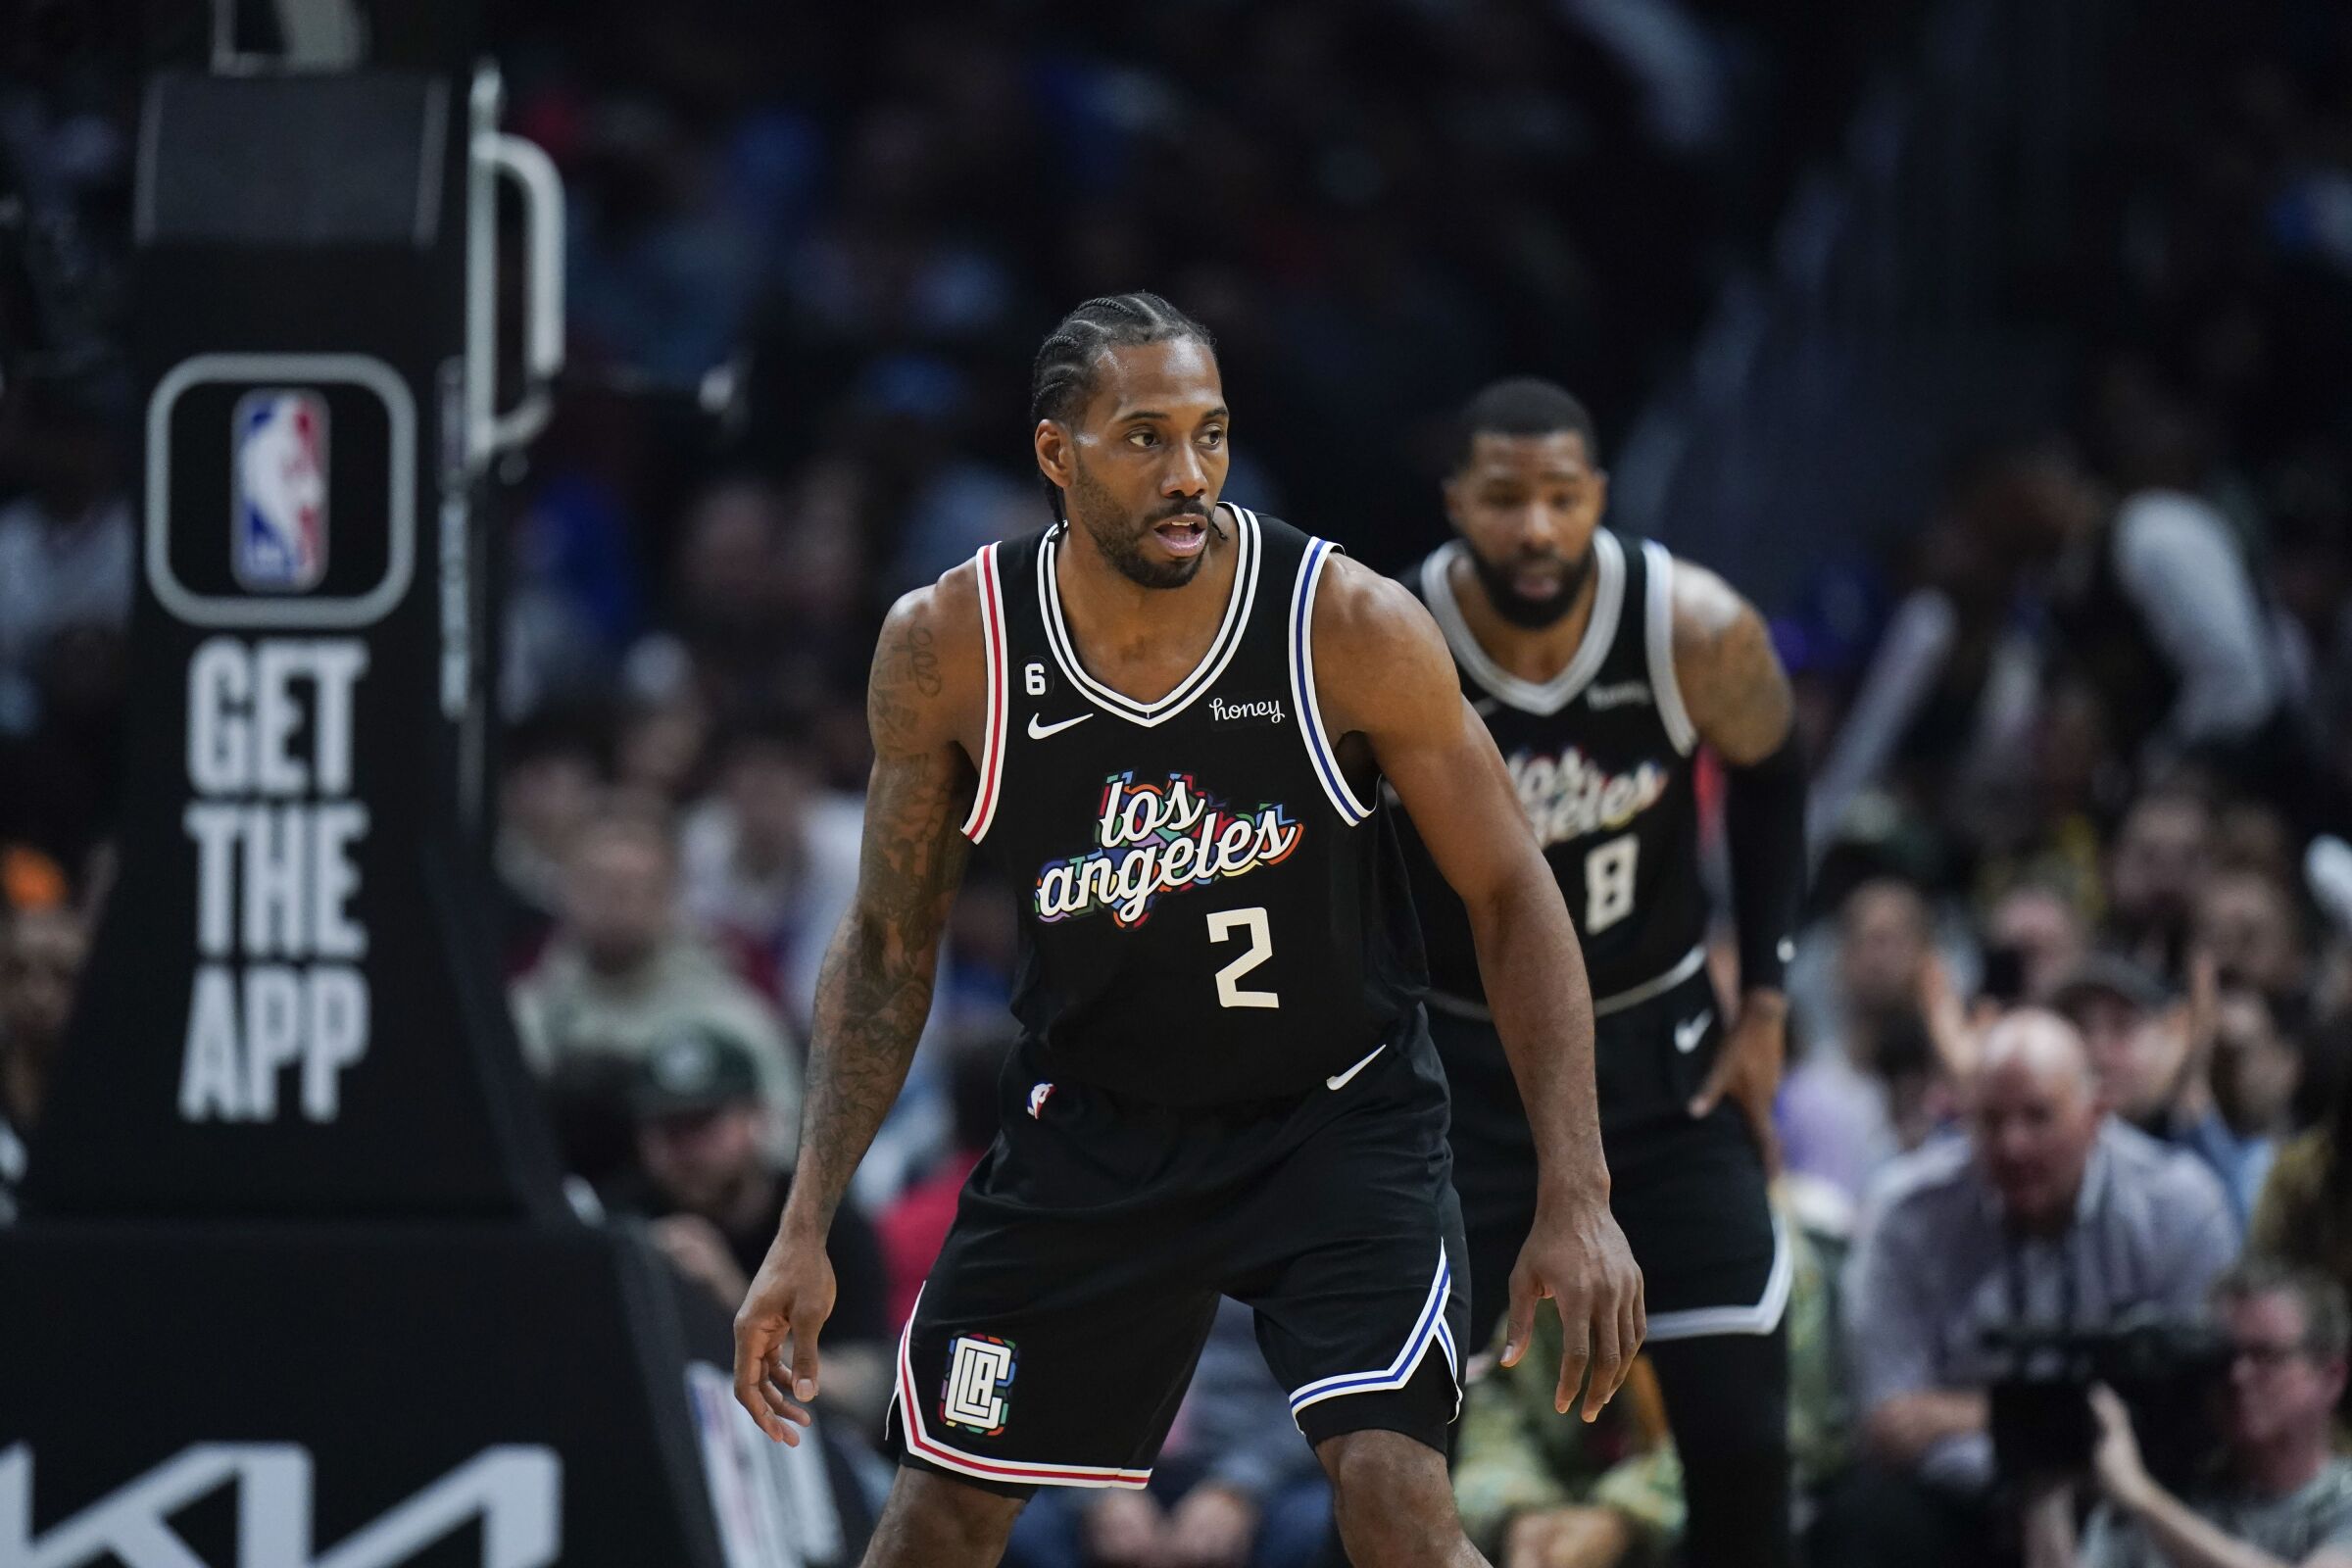 Clippers forward Kawhi Leonard gets into a defensive stance as the Raptors bring the ball up court.